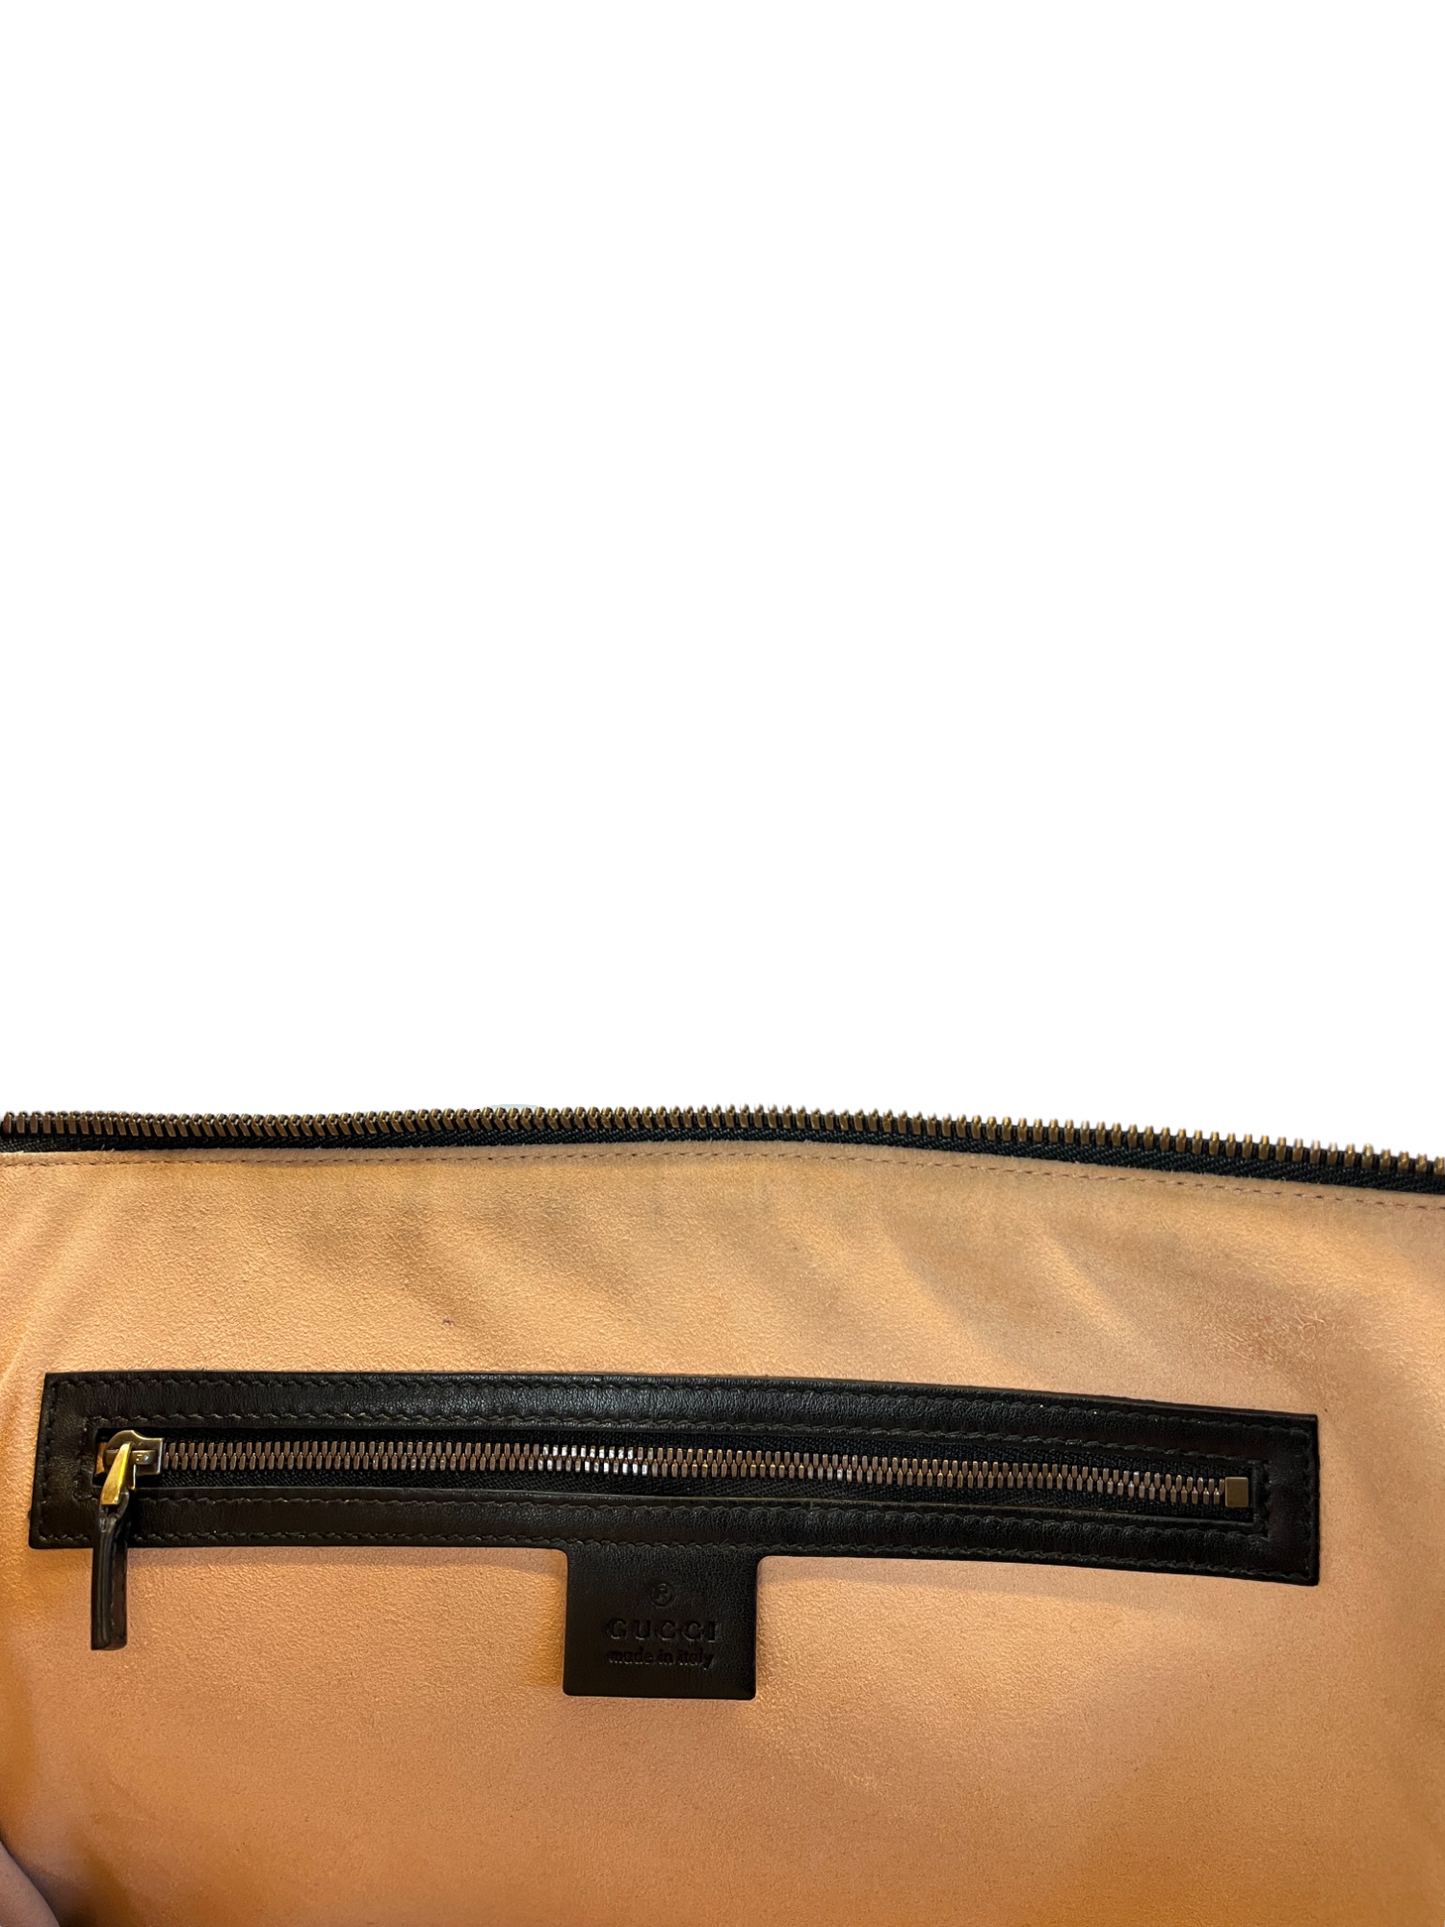 Gucci Pouch/Computer Sleeve